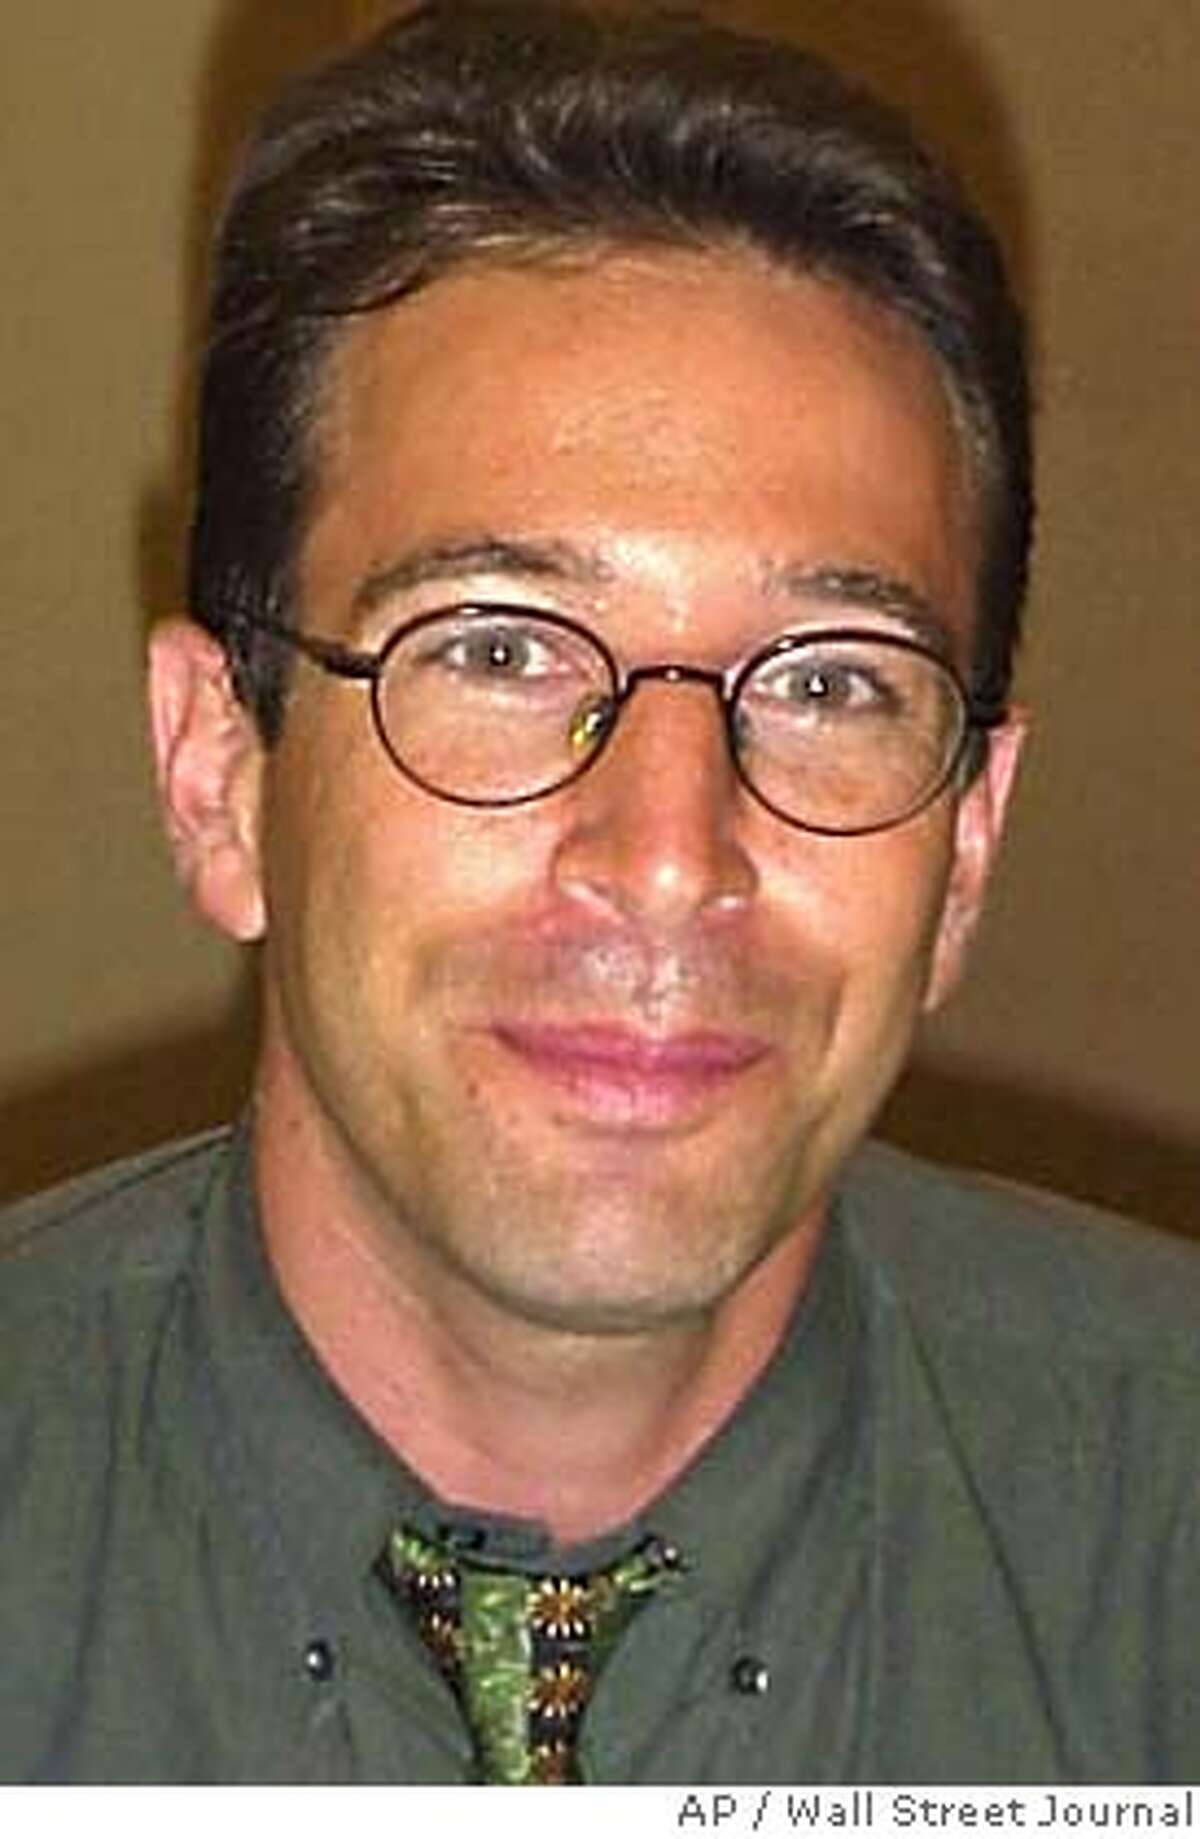 ** FILE ** Wall Street Journal reporter Daniel Pearl is shown in this undated file photo. American authorities investigating the killing of Pearl in Pakistan now believe that he was slain by Khalid Shaikh Mohammed, the alleged mastermind of the Sept. 11 attacks. (AP Photo/Wall Street Journal) ALSO RAN: 1/1/2004 Daniel Pearl, left, was slain by Khalid Shaikh Mohammed, right, U.S. officials say. Photo caption pearl22_PH11012003200WALL STREET JOURNAL** FILE ** Wall Street Journal reporter Daniel Pearl is shown in this undated file photo. American authorities investigating the killing of Pearl in Pakistan now believe that he was slain by Khalid Shaikh Mohammed, the alleged mastermind of the Sept. 11 attacks. (AP Photo-Wall Street Journal)__NO SALES UNDATED PHOTO cat UNDATED PHOTO This photo was in an early 2002 e-mail saying Daniel Pearl was being held to protest treatment of prisoners at Guantanamo Bay. Judea Pearl speaks at an Arlington, Va., ceremony honoring 31 journalists who died in the line of duty in 2002. Ran on: 09-10-2005 Daniel Pearls killing has led his father on a quest to foster understanding between Jews and Muslims. Ran on: 09-10-2005 Daniel Pearls killing has led his father on a quest to foster understanding between Jews and Muslims. Nation#MainNews#Chronicle#1/1/2004#ALL#3star##0421449659